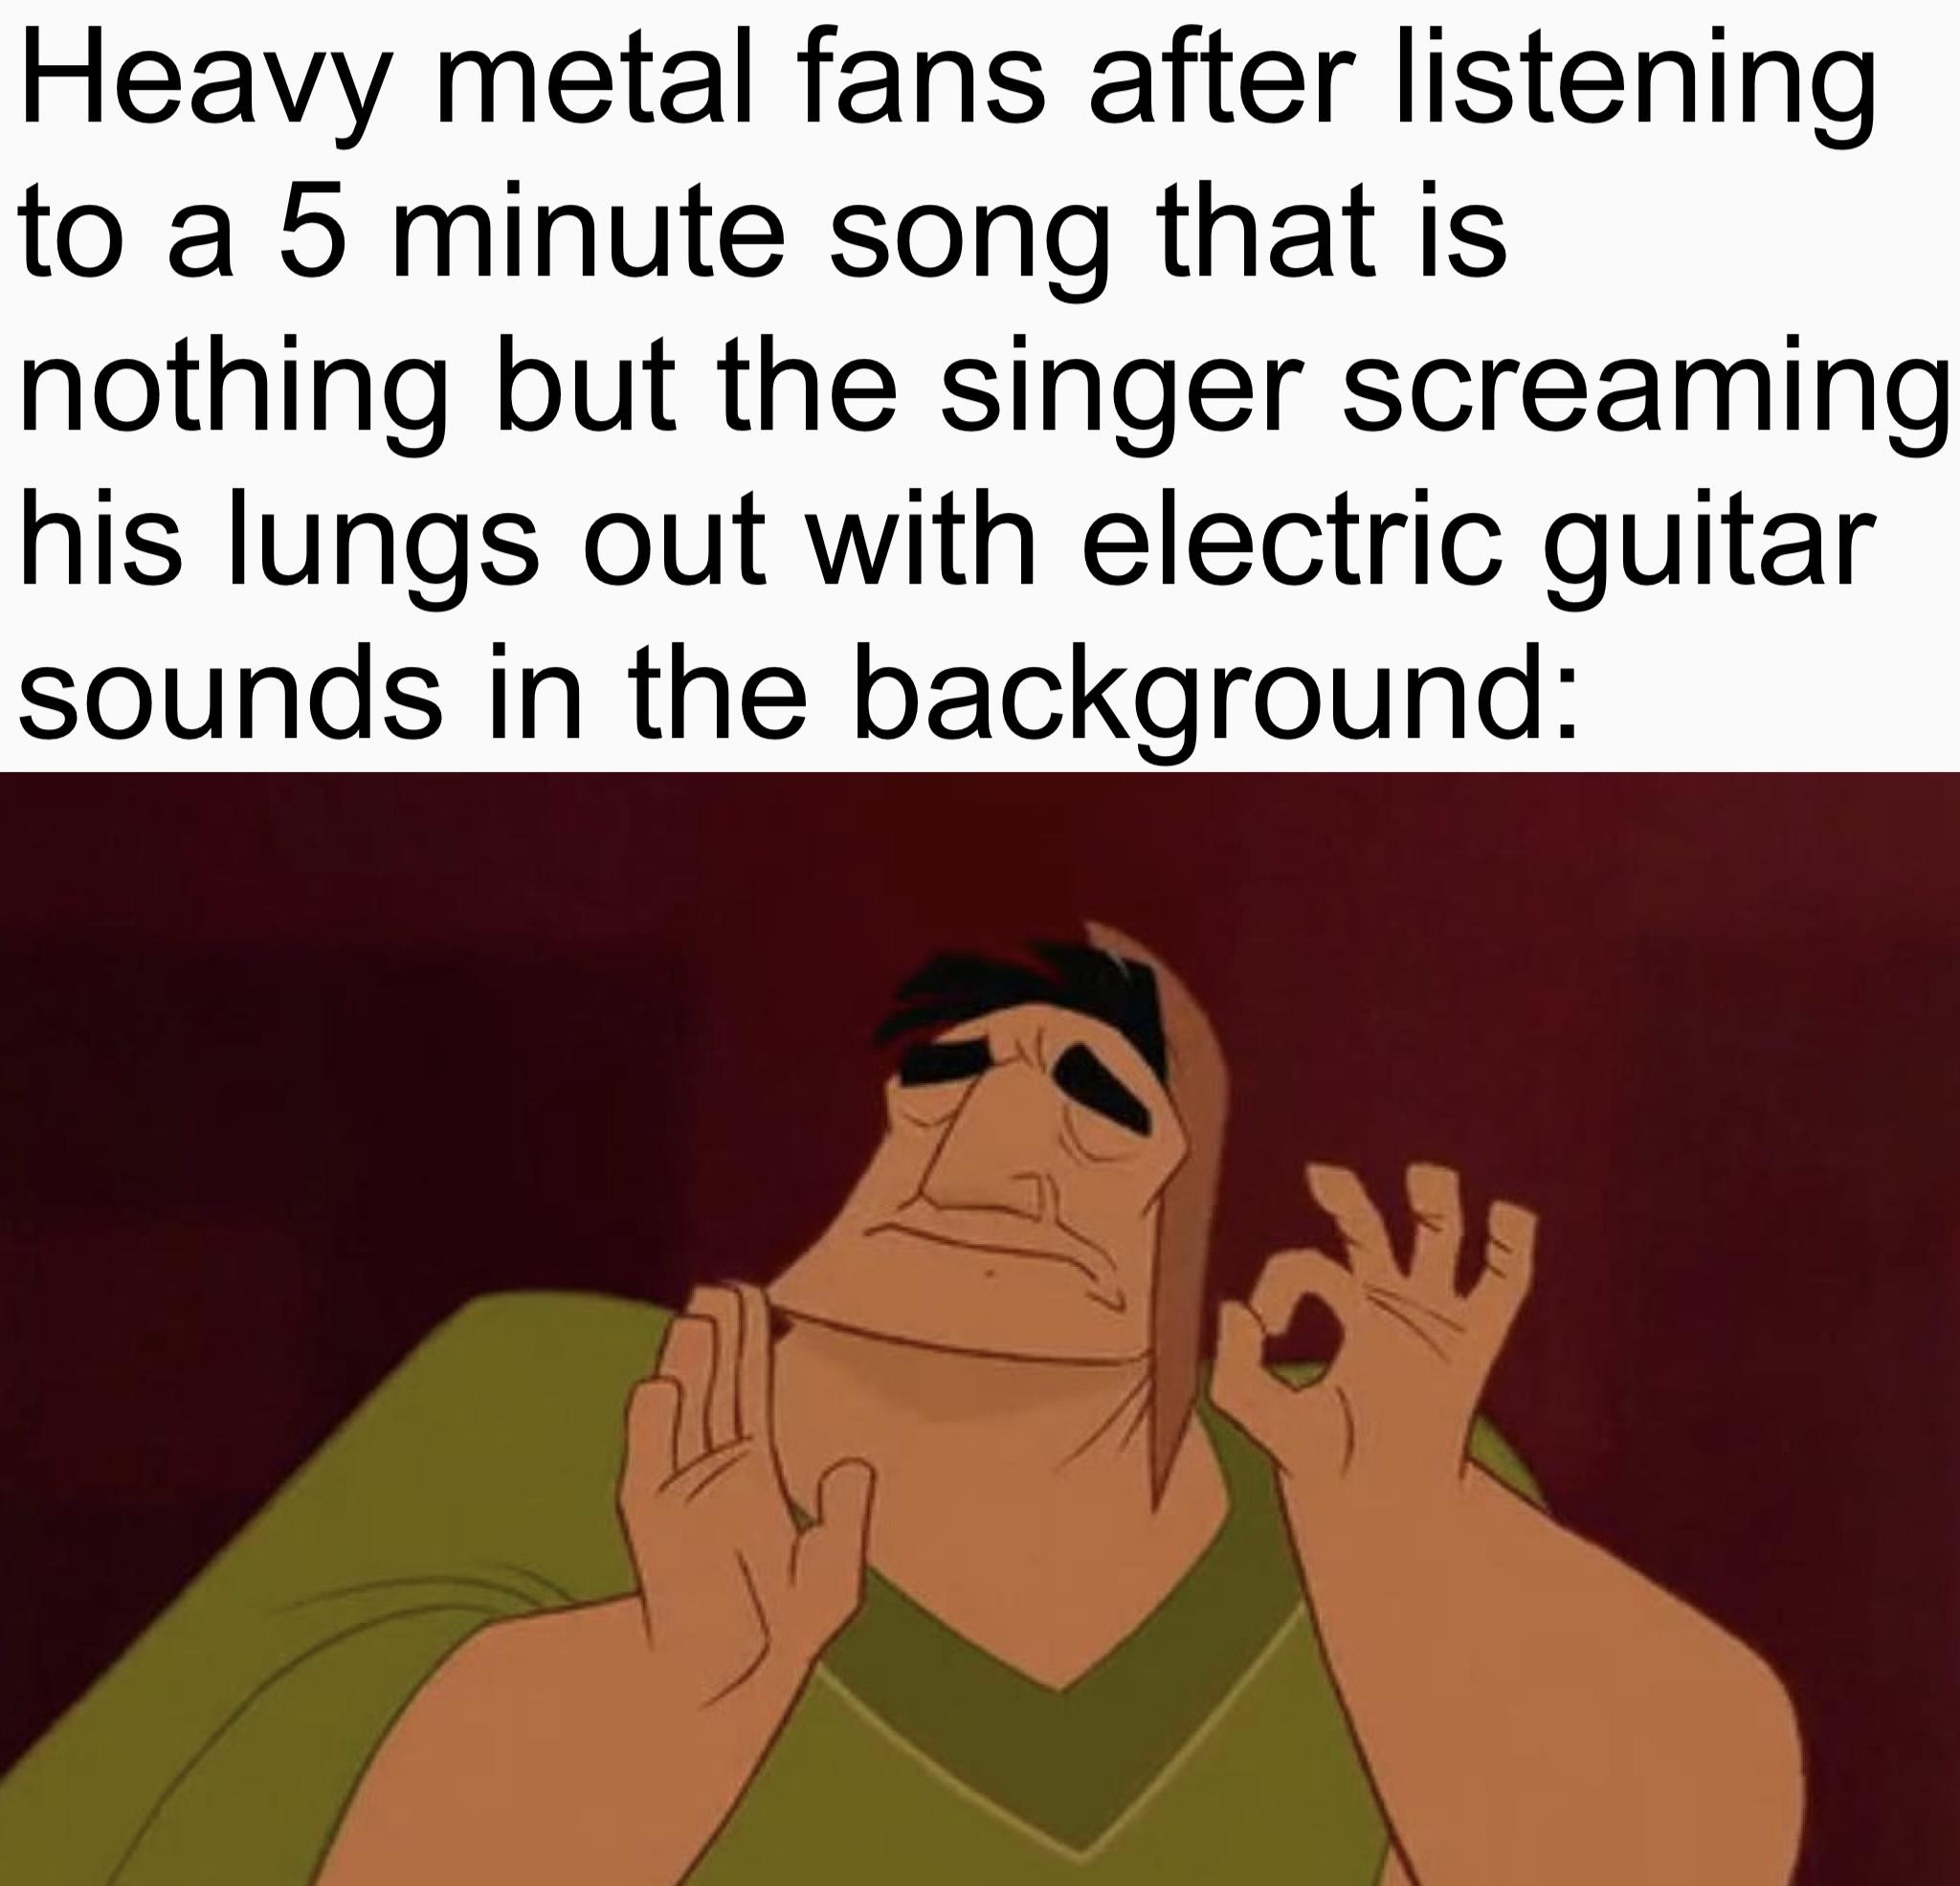 dank memes - quotes - Heavy metal fans after listening to a 5 minute song that is nothing but the singer screaming his lungs out with electric guitar sounds in the background H